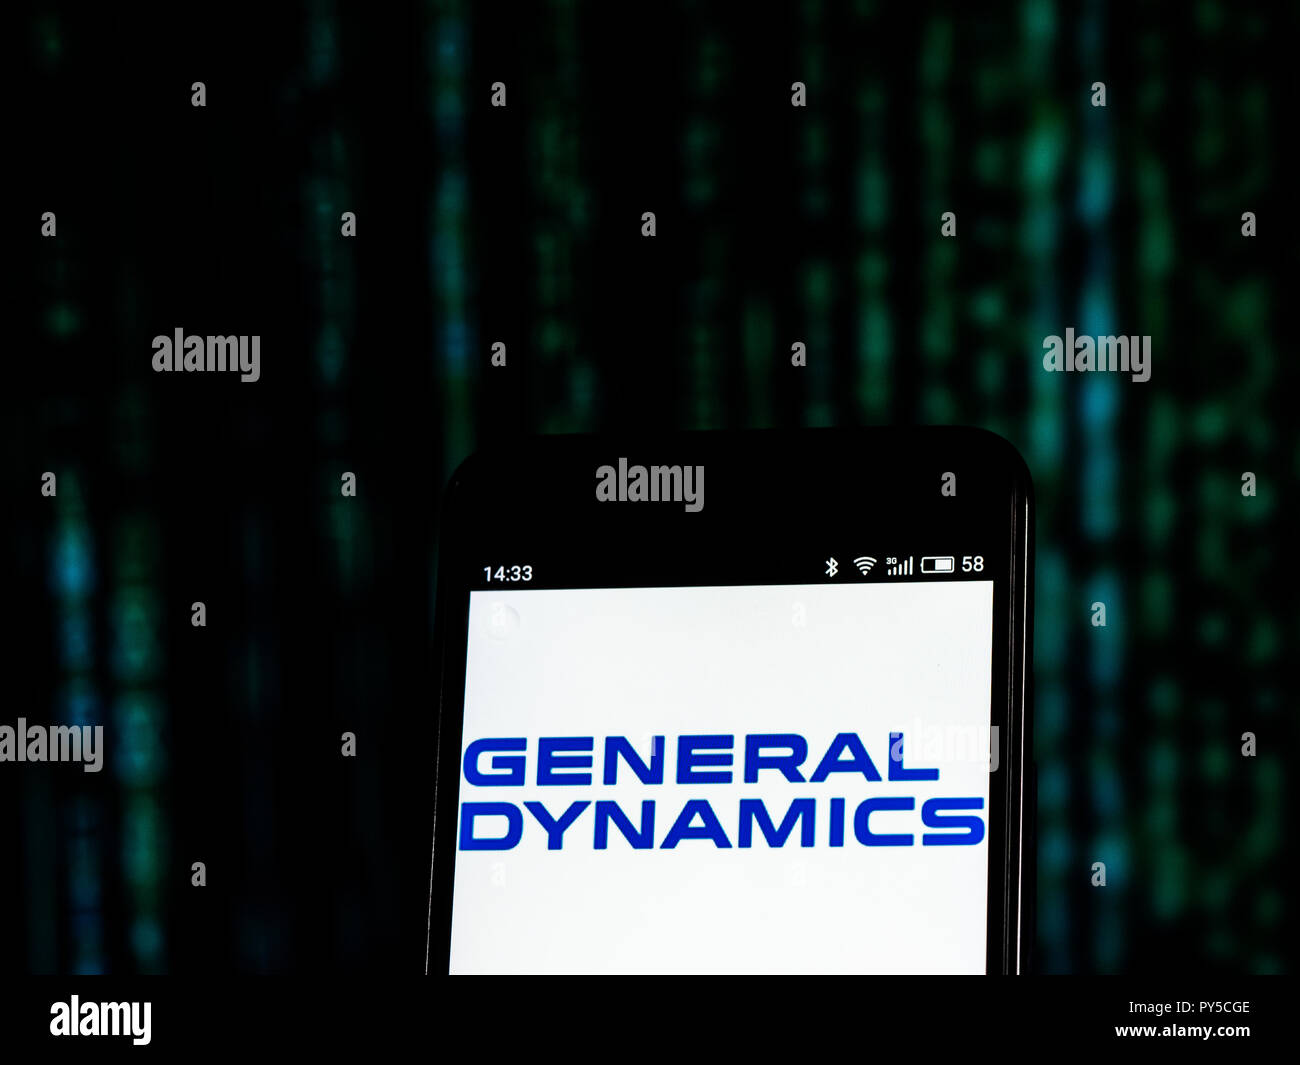 General Dynamics Aerospace and defense company logo seen displayed on smart phone. General Dynamics Corporation is an American corporation formed by mergers and divestitures. It is the world's fifth-largest defense contractor based on 2012 revenues. Stock Photo